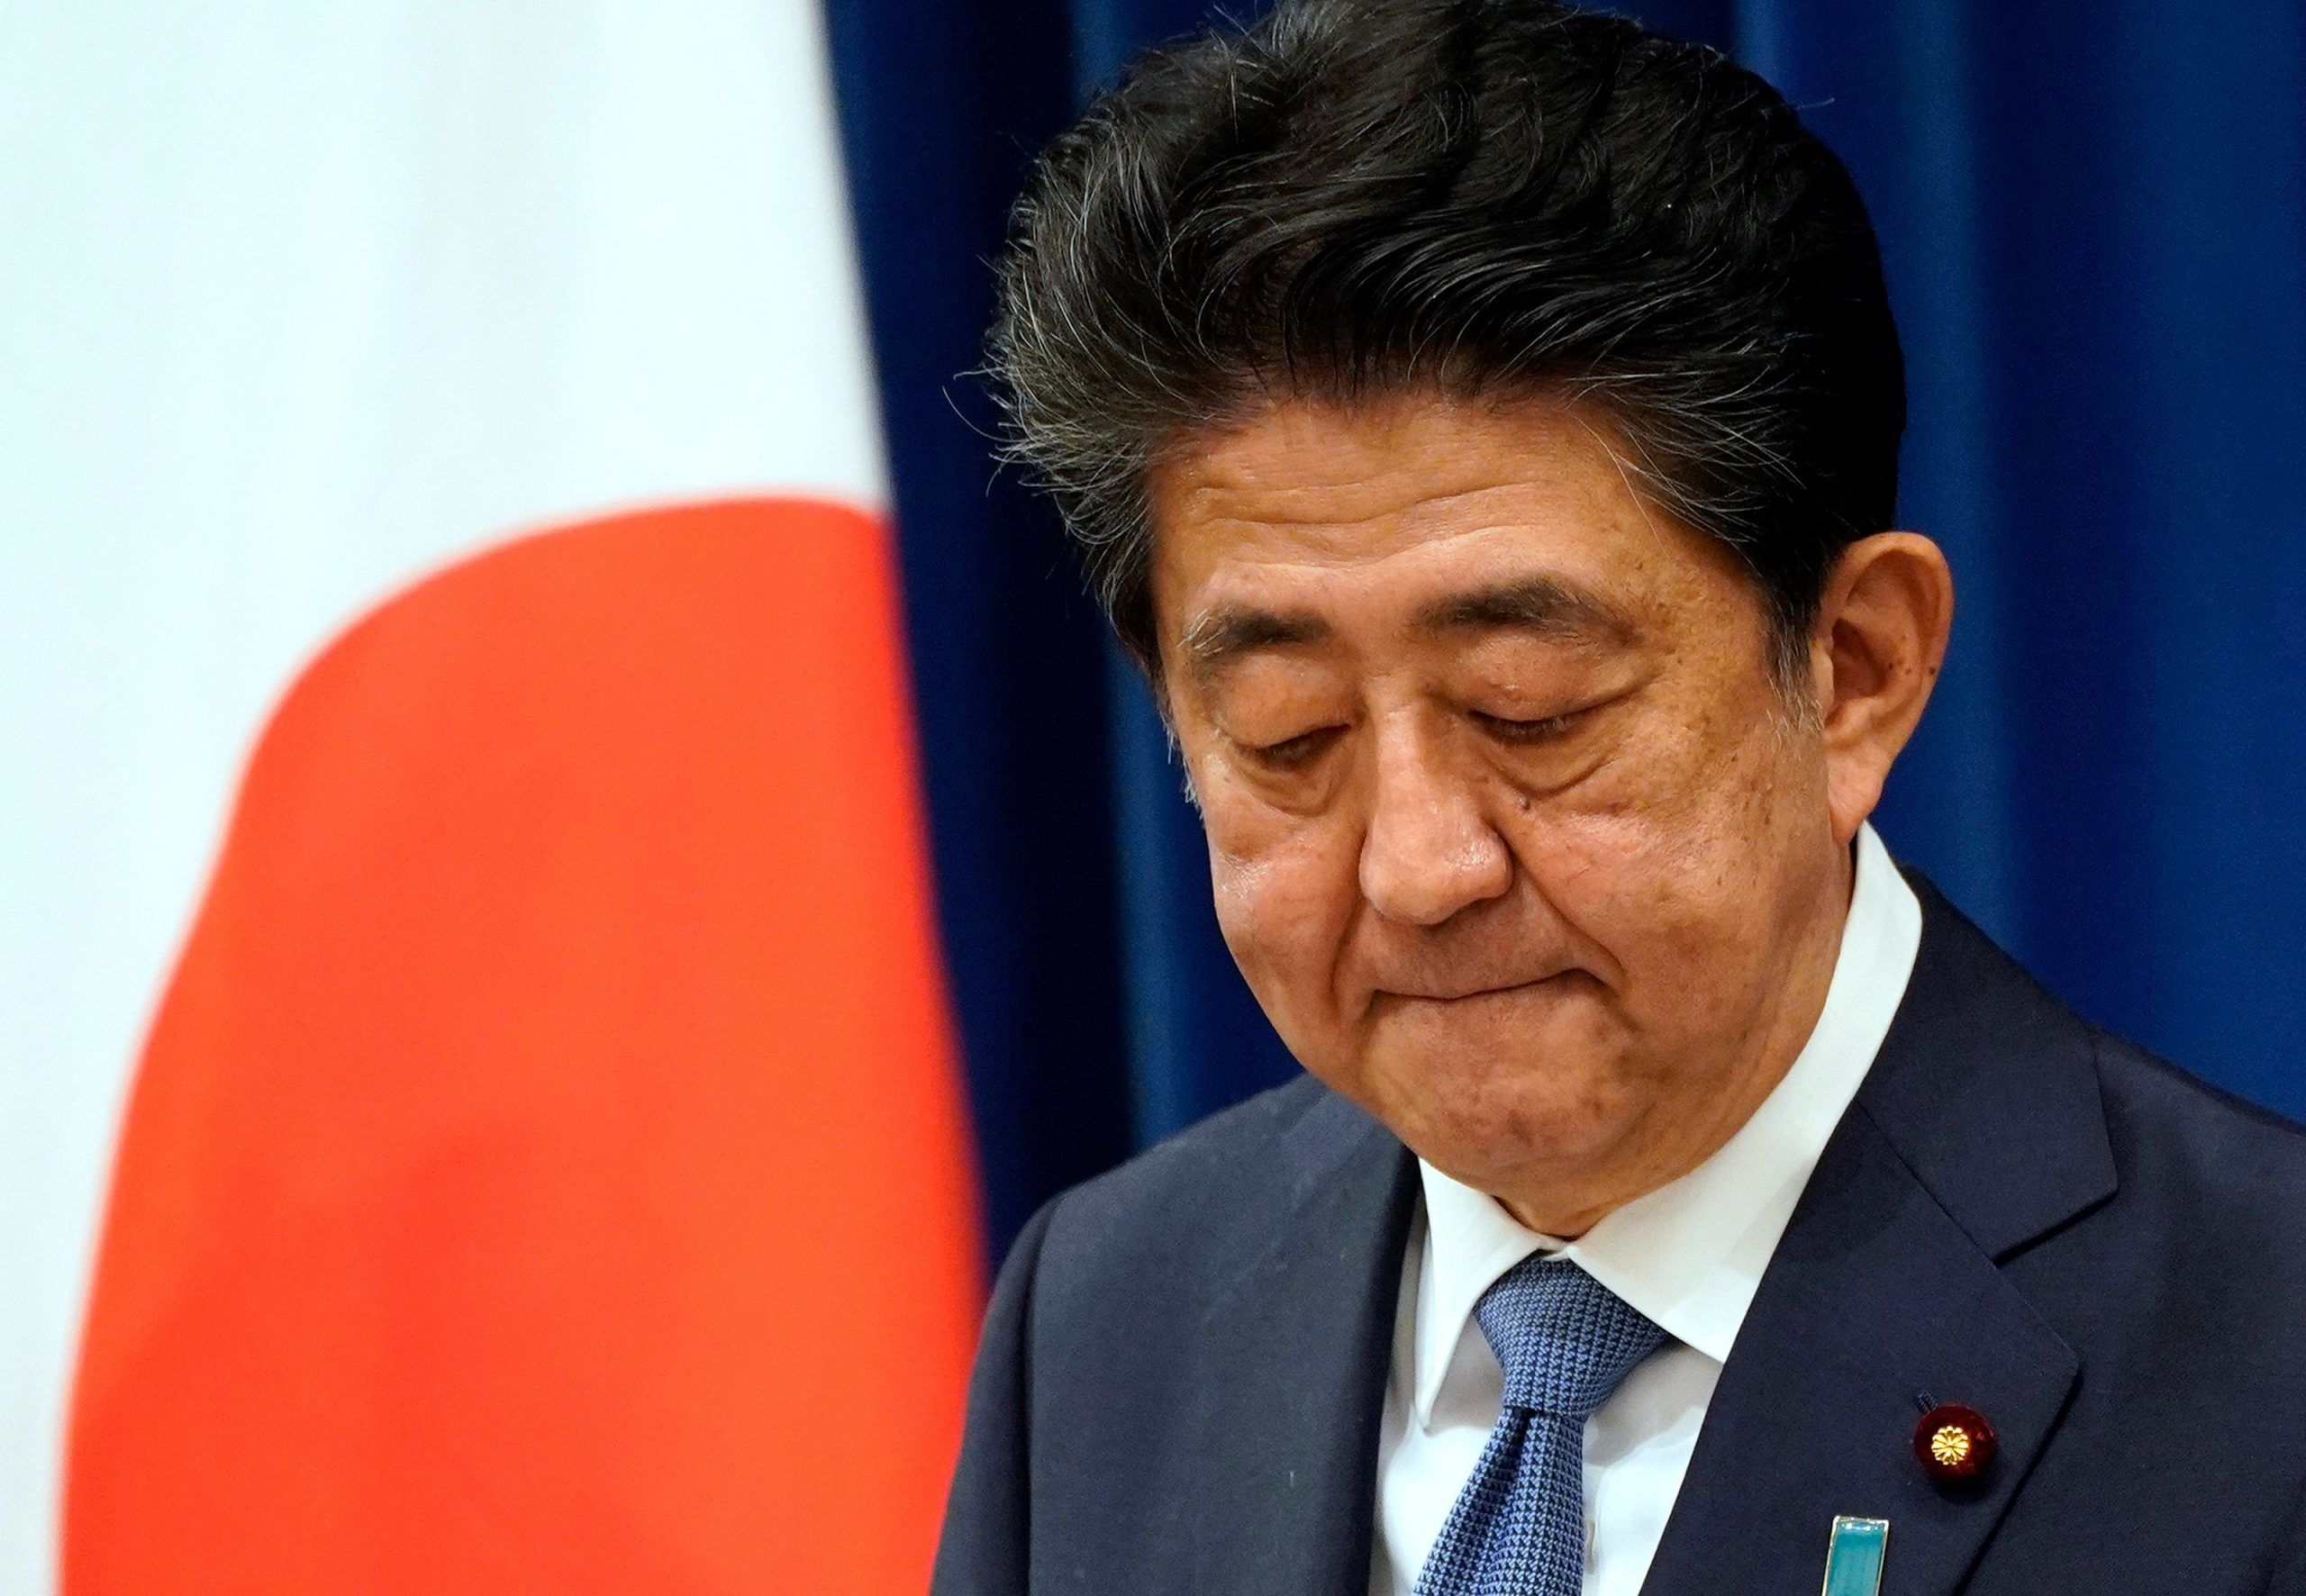 Japan's Prime Minister Shinzo Abe announced on August 28, 2020 he will resign over health problems, in a bombshell development that kicks off a leadership contest in the world's third-largest economy.